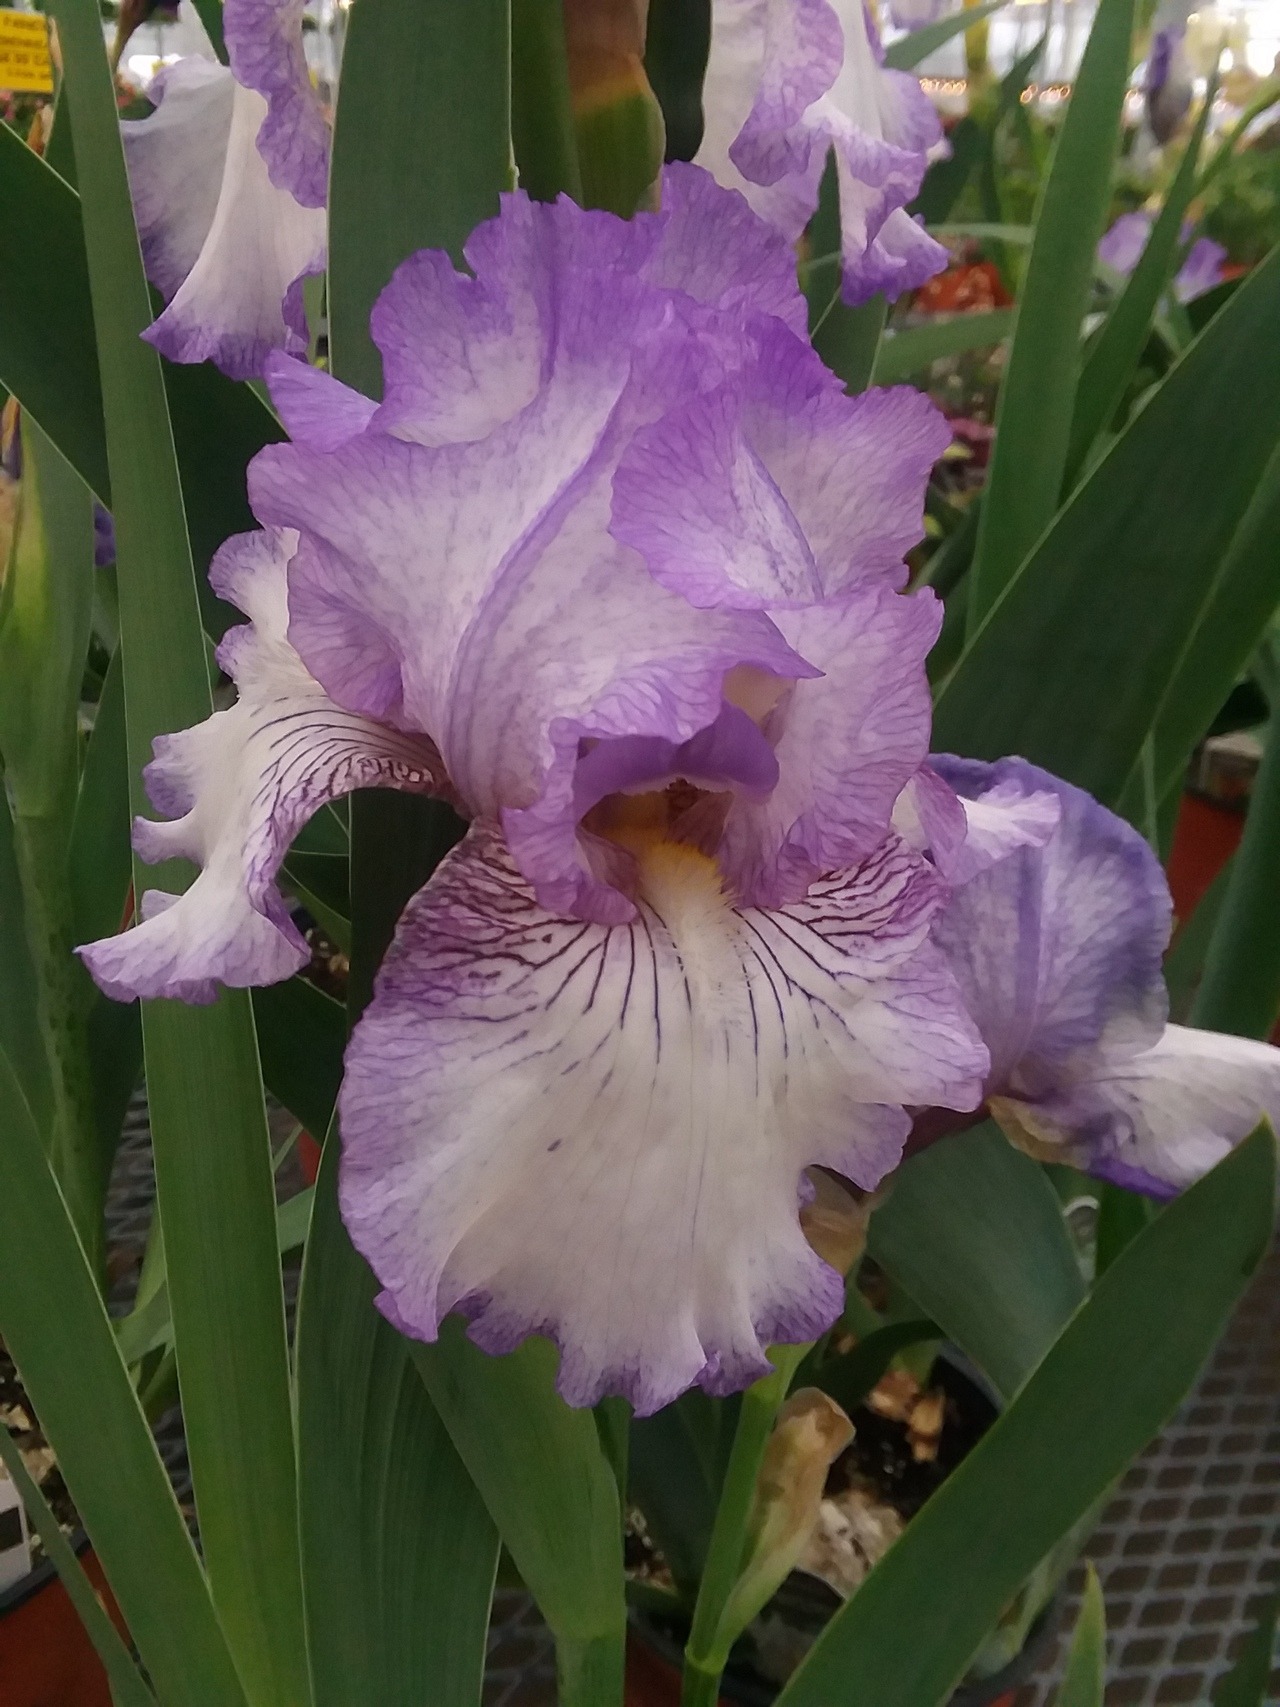 hyssopandbee: “Very early irises! This one’s ‘Earl of Essex.’ ”